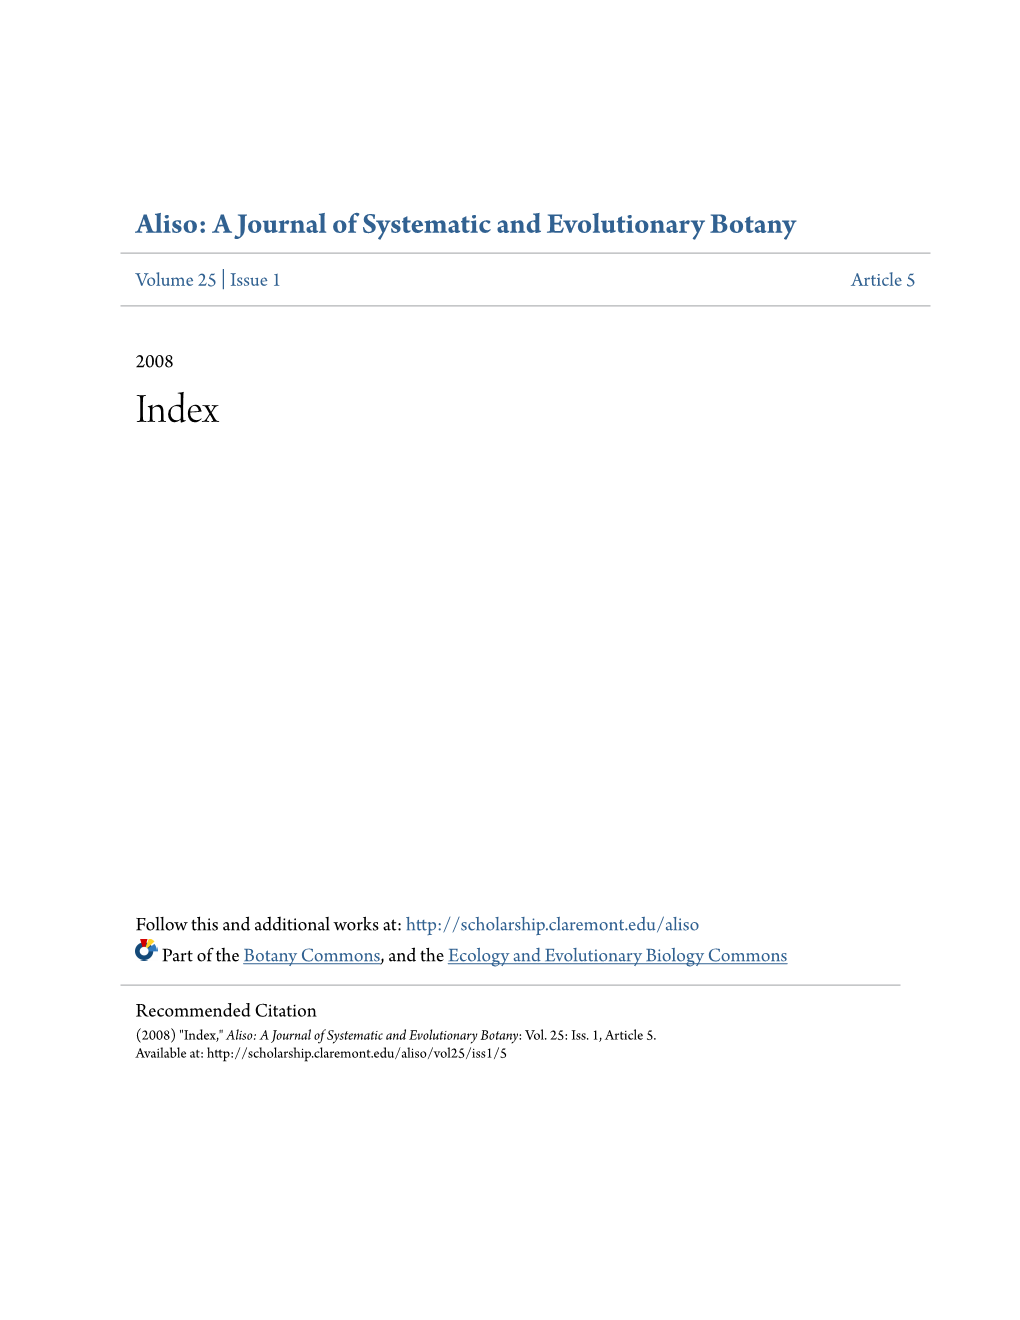 Aliso: a Journal of Systematic and Evolutionary Botany